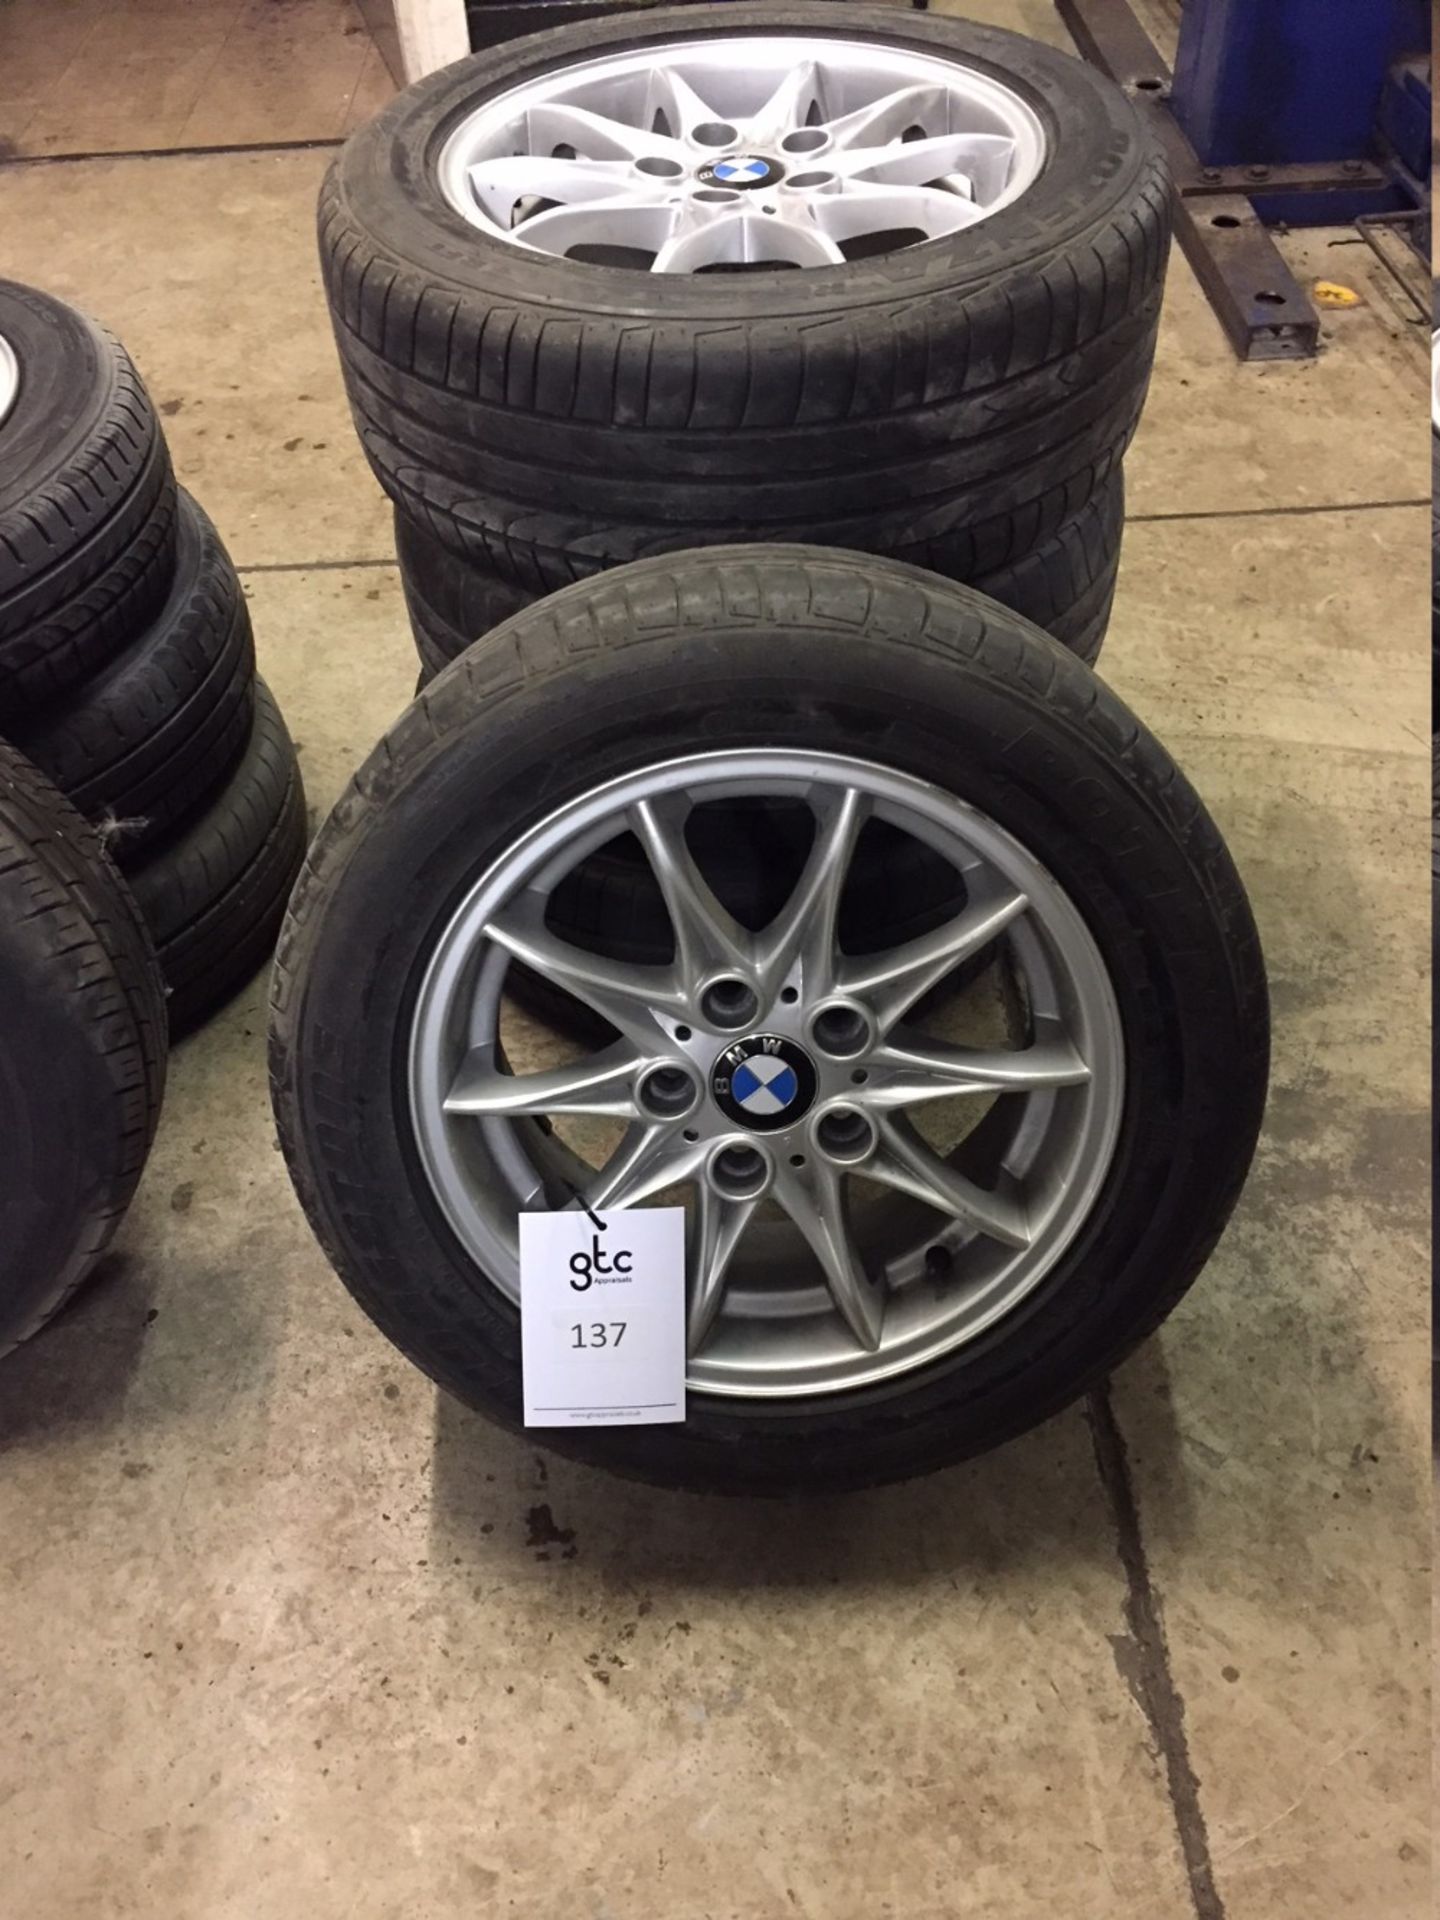 Set of BMW 10 Spoke Alloy Wheels with 225/50 R16 Part-worn Tyres